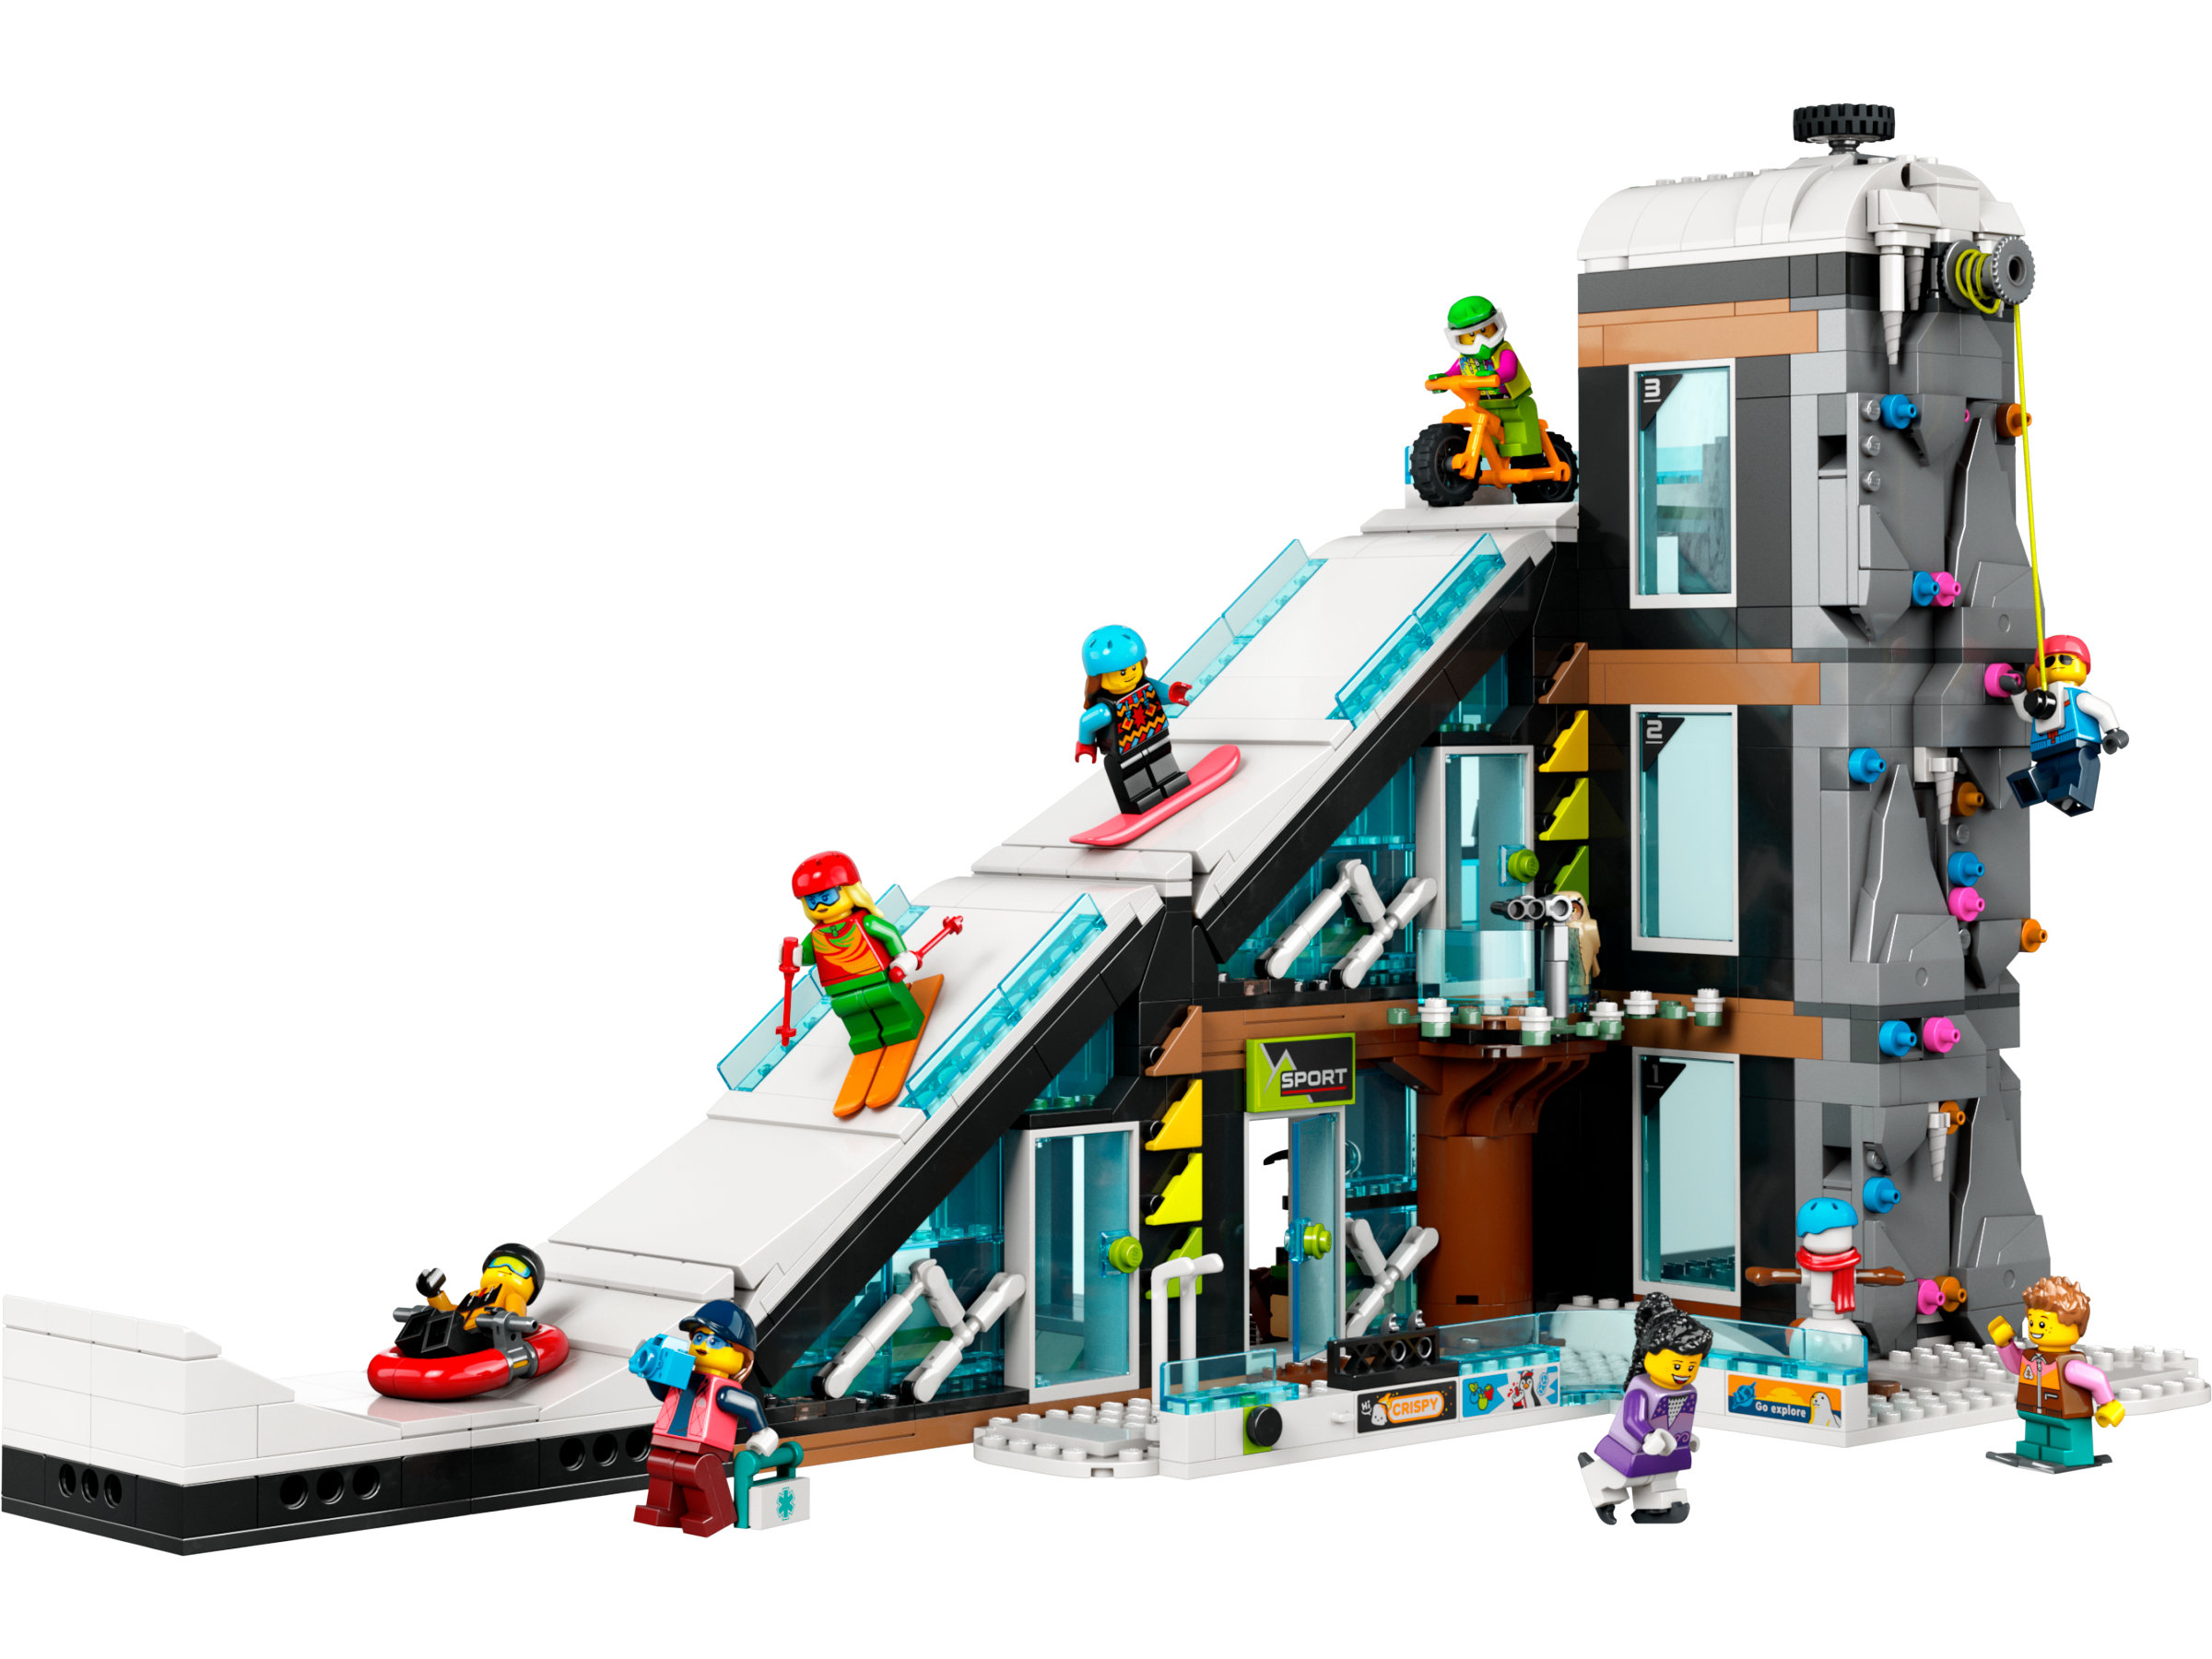 Ski Climbing Center 60366 | City Buy online at the Official LEGO® Shop